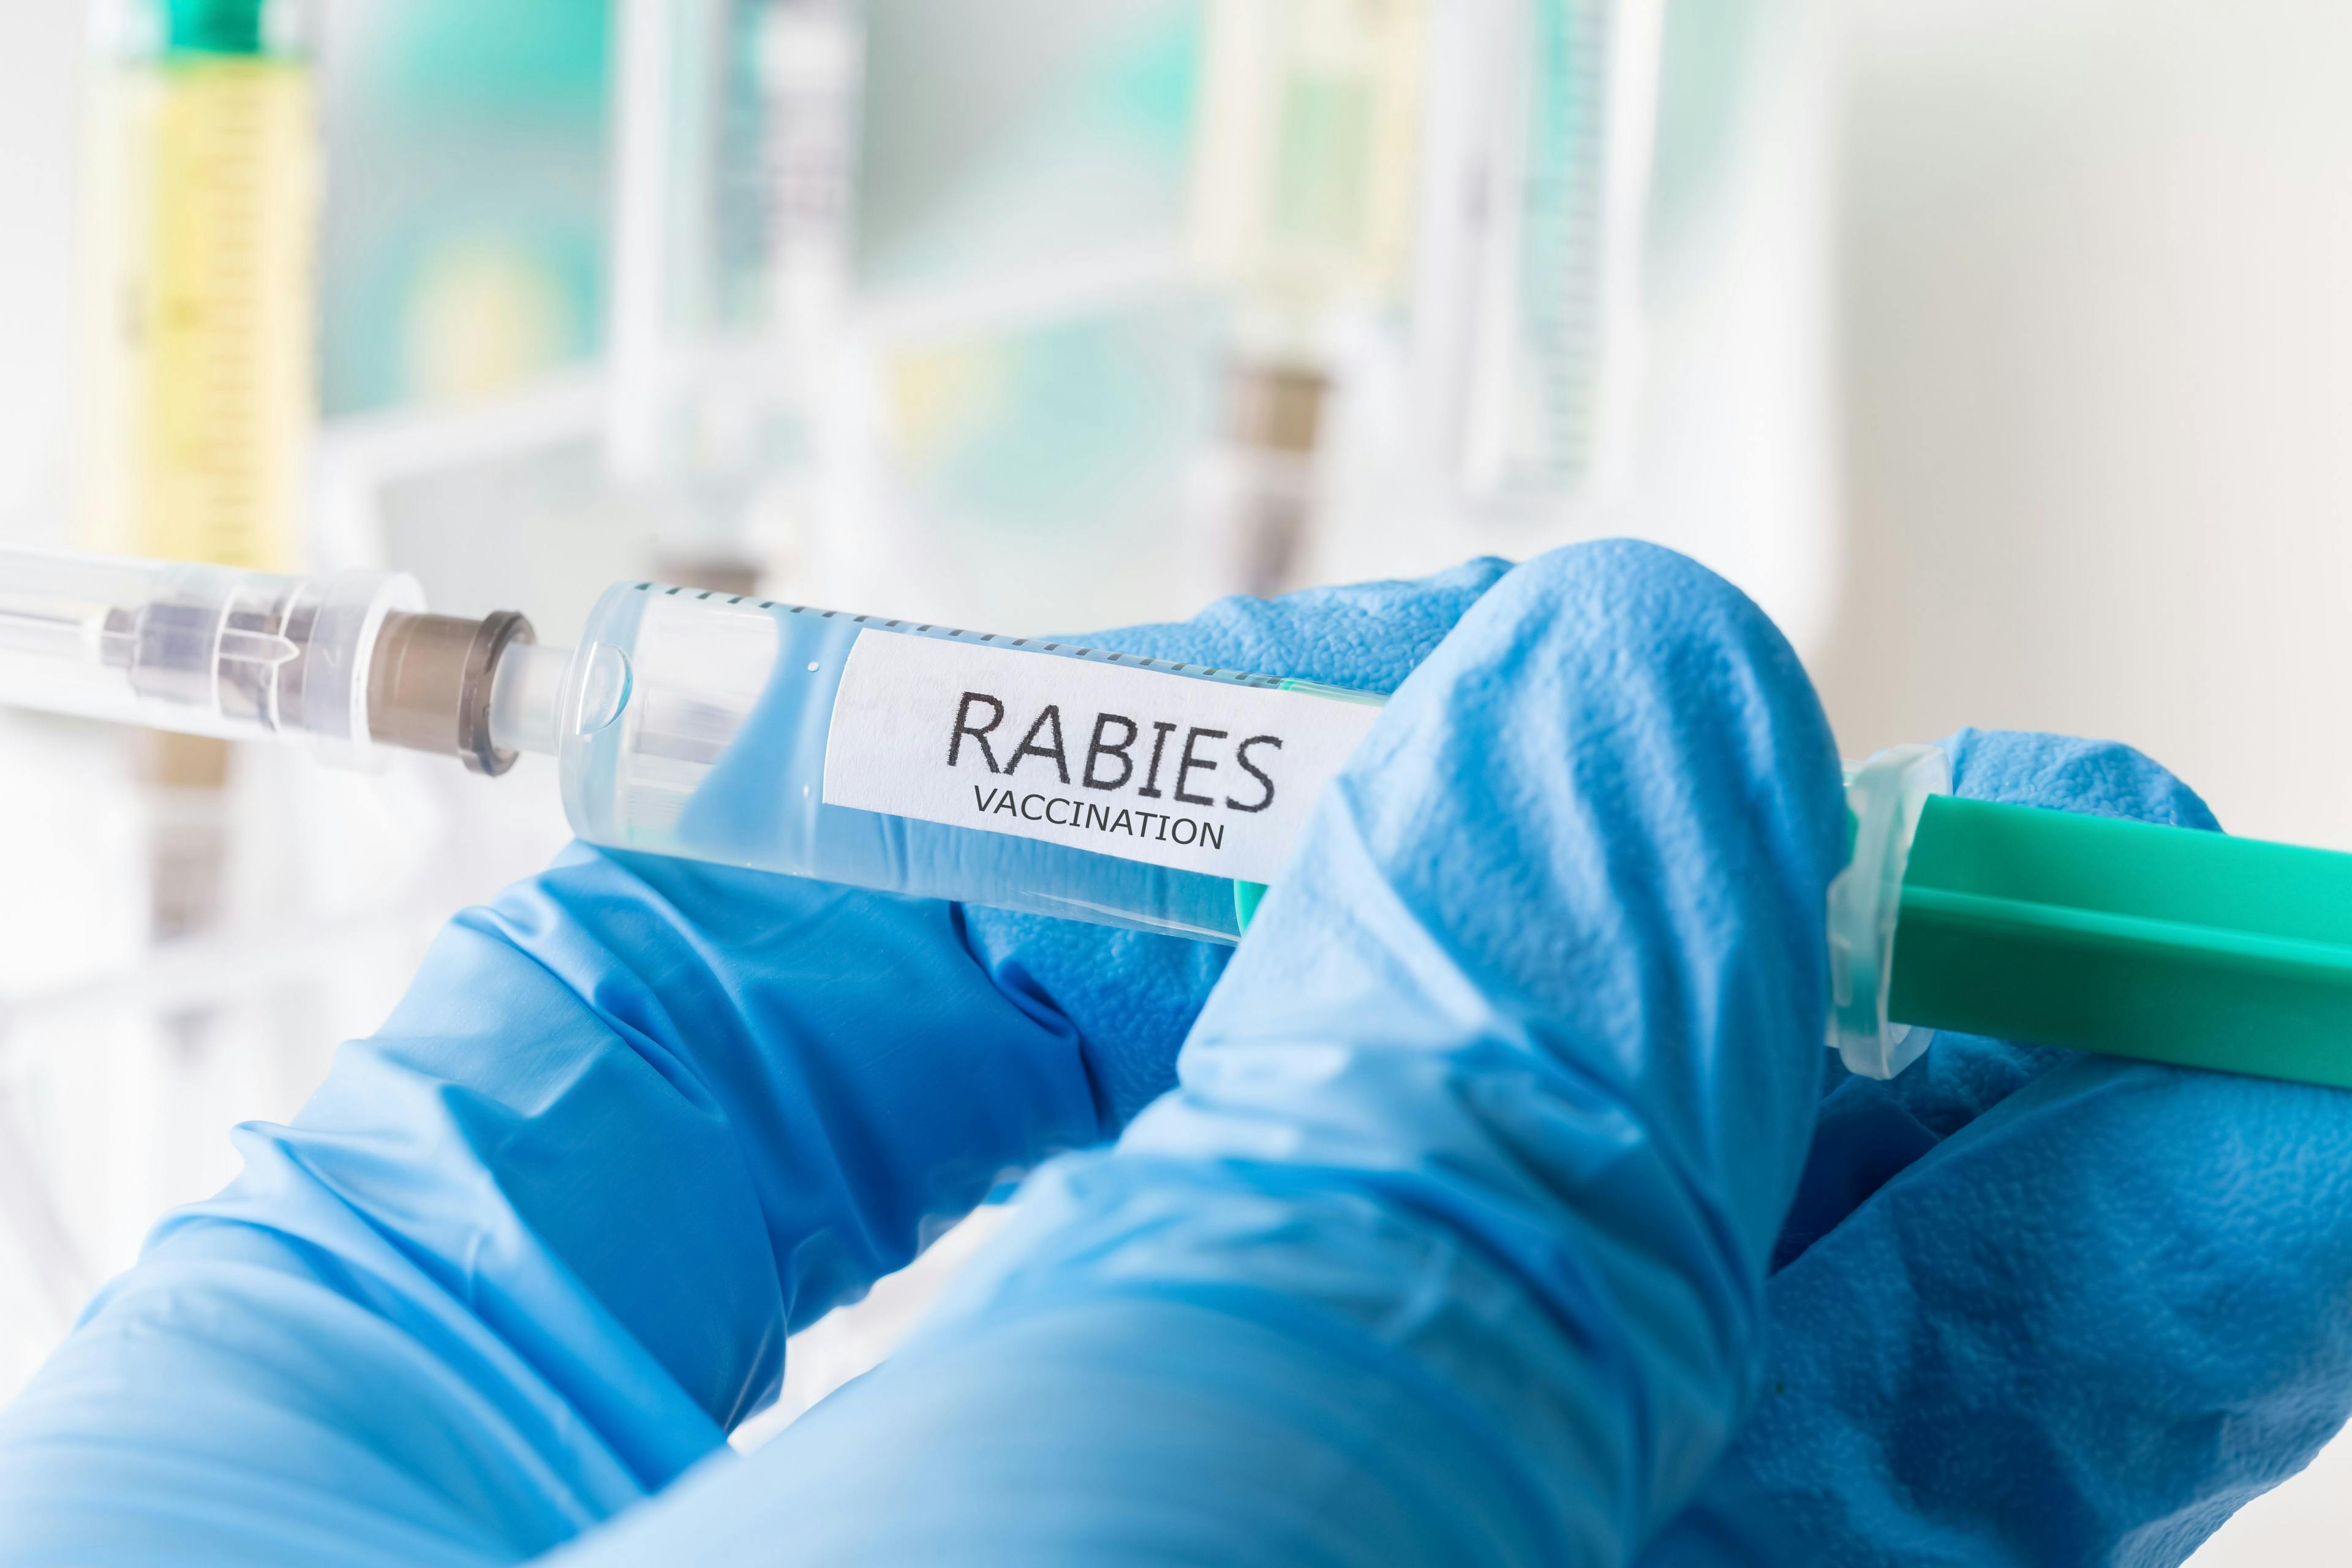 A better understanding of rabies laws and regulations